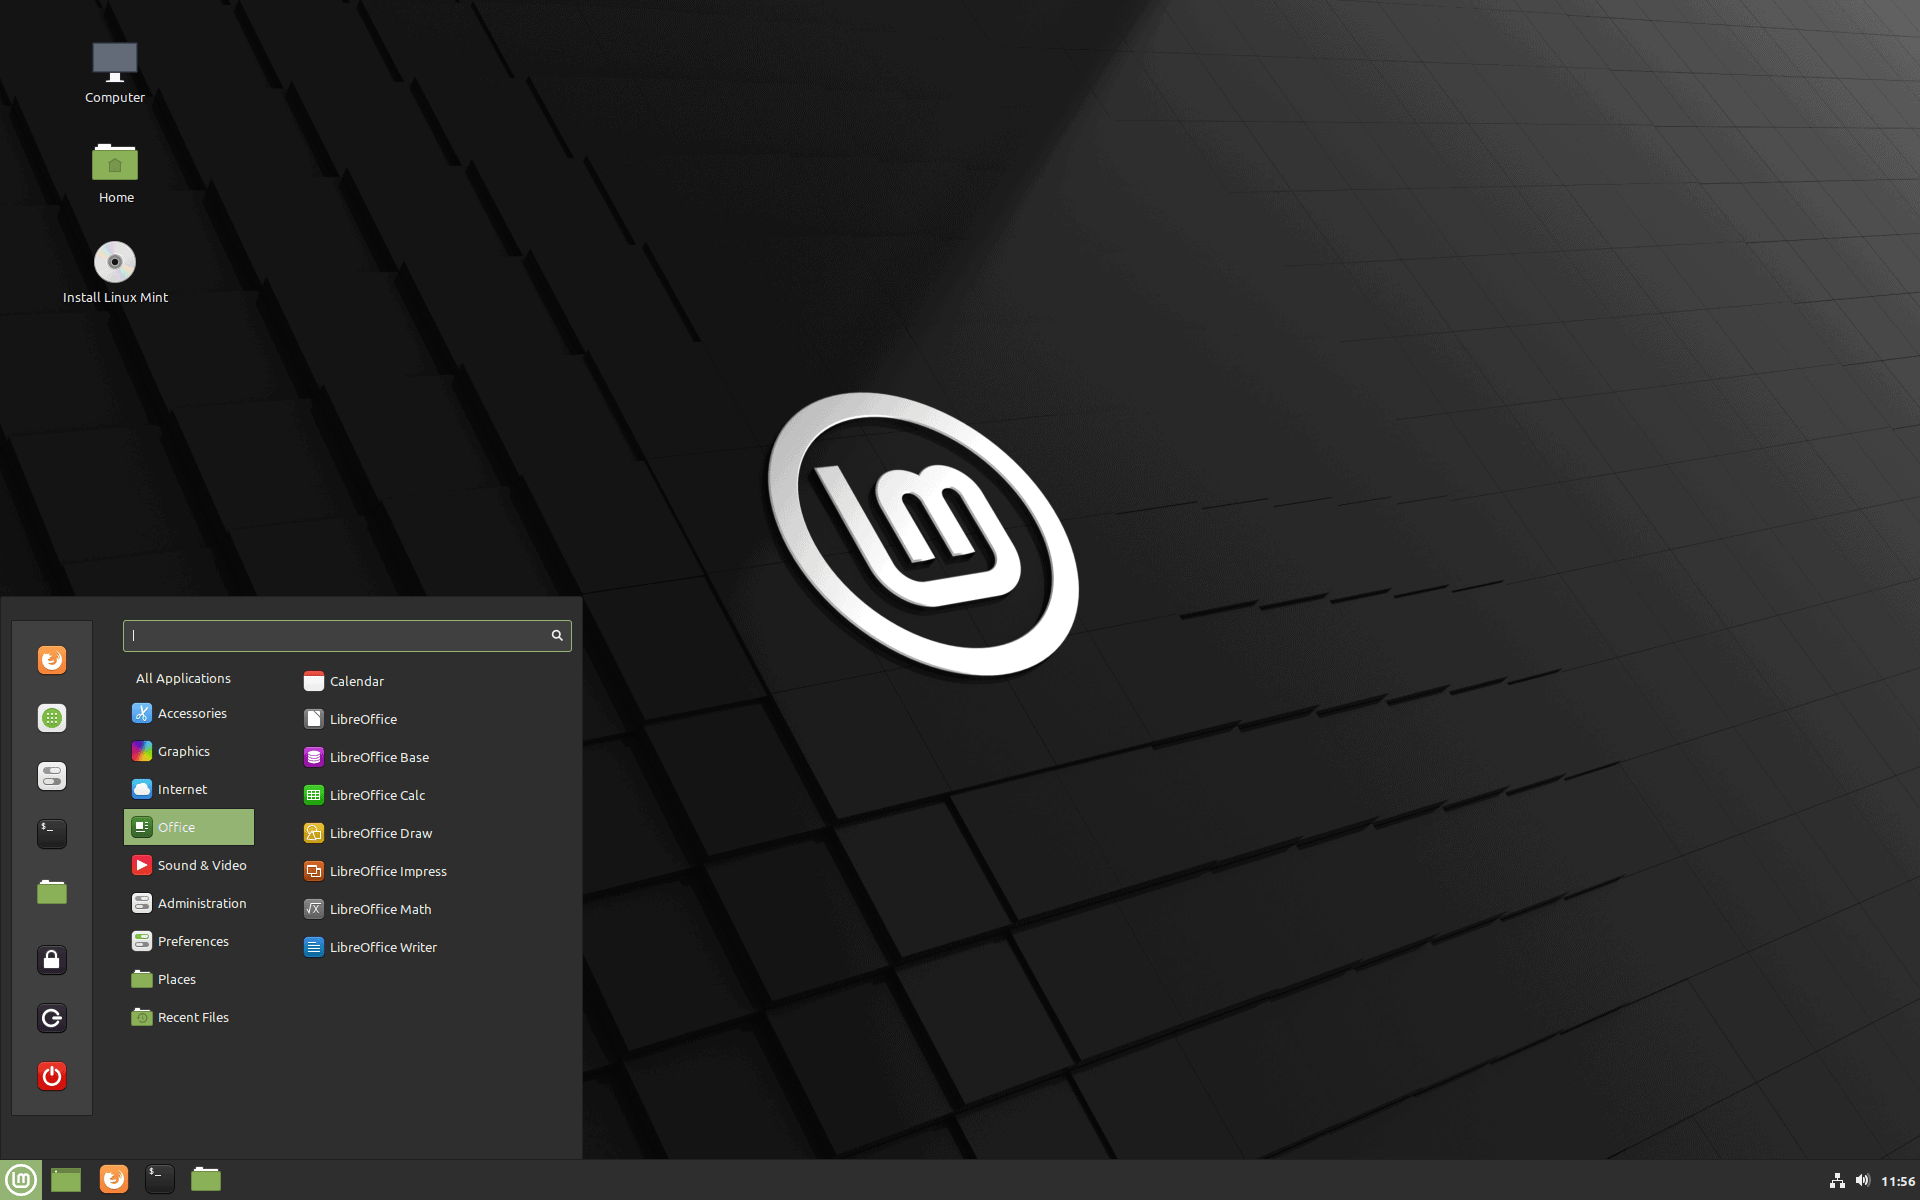 Linux Mint 20 Final has been released